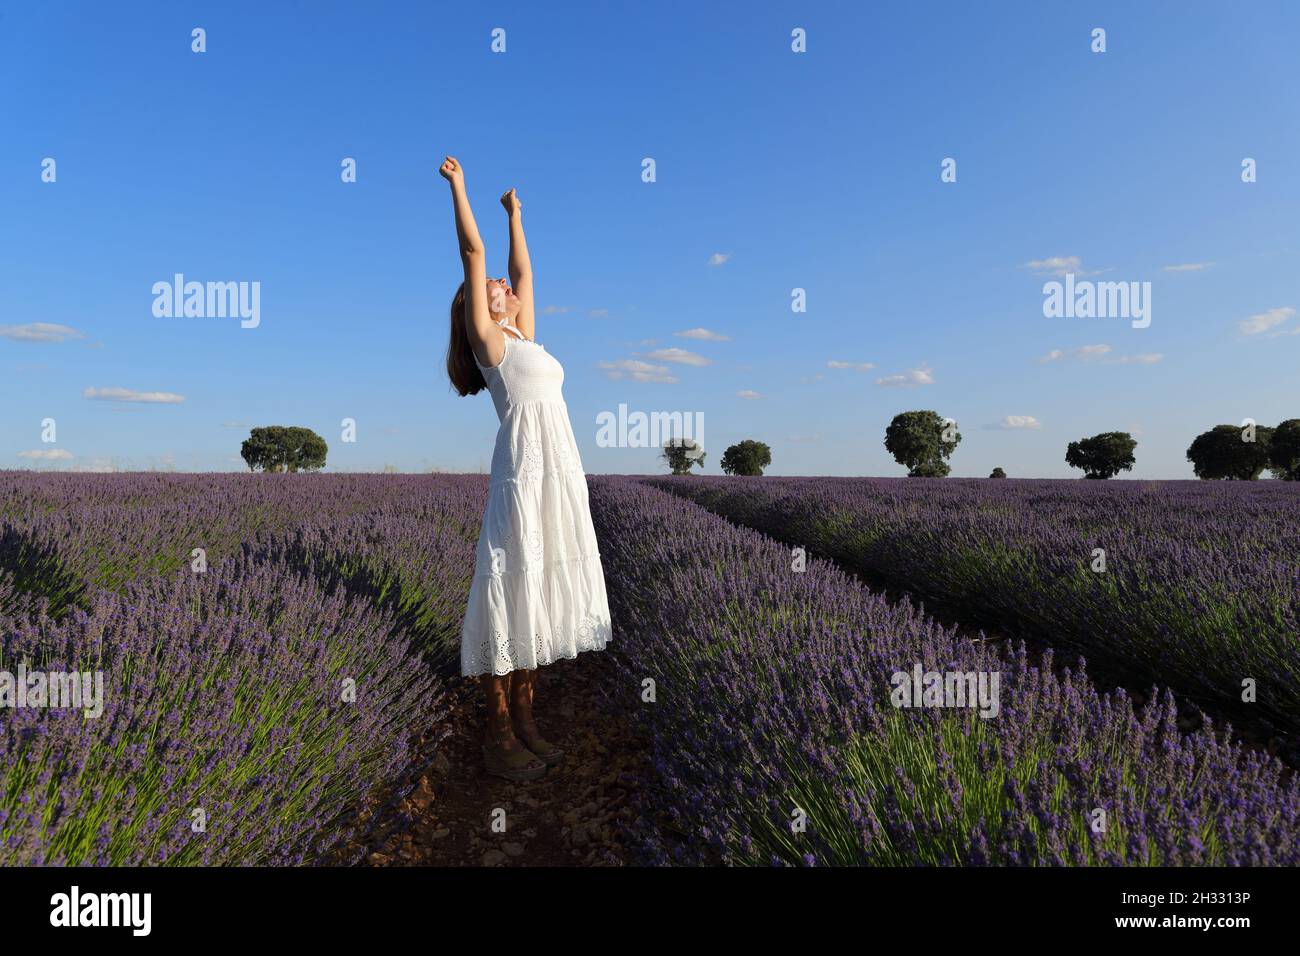 Excited woman wearing white dress celebrating vacation raising arms in a lavender field Stock Photo